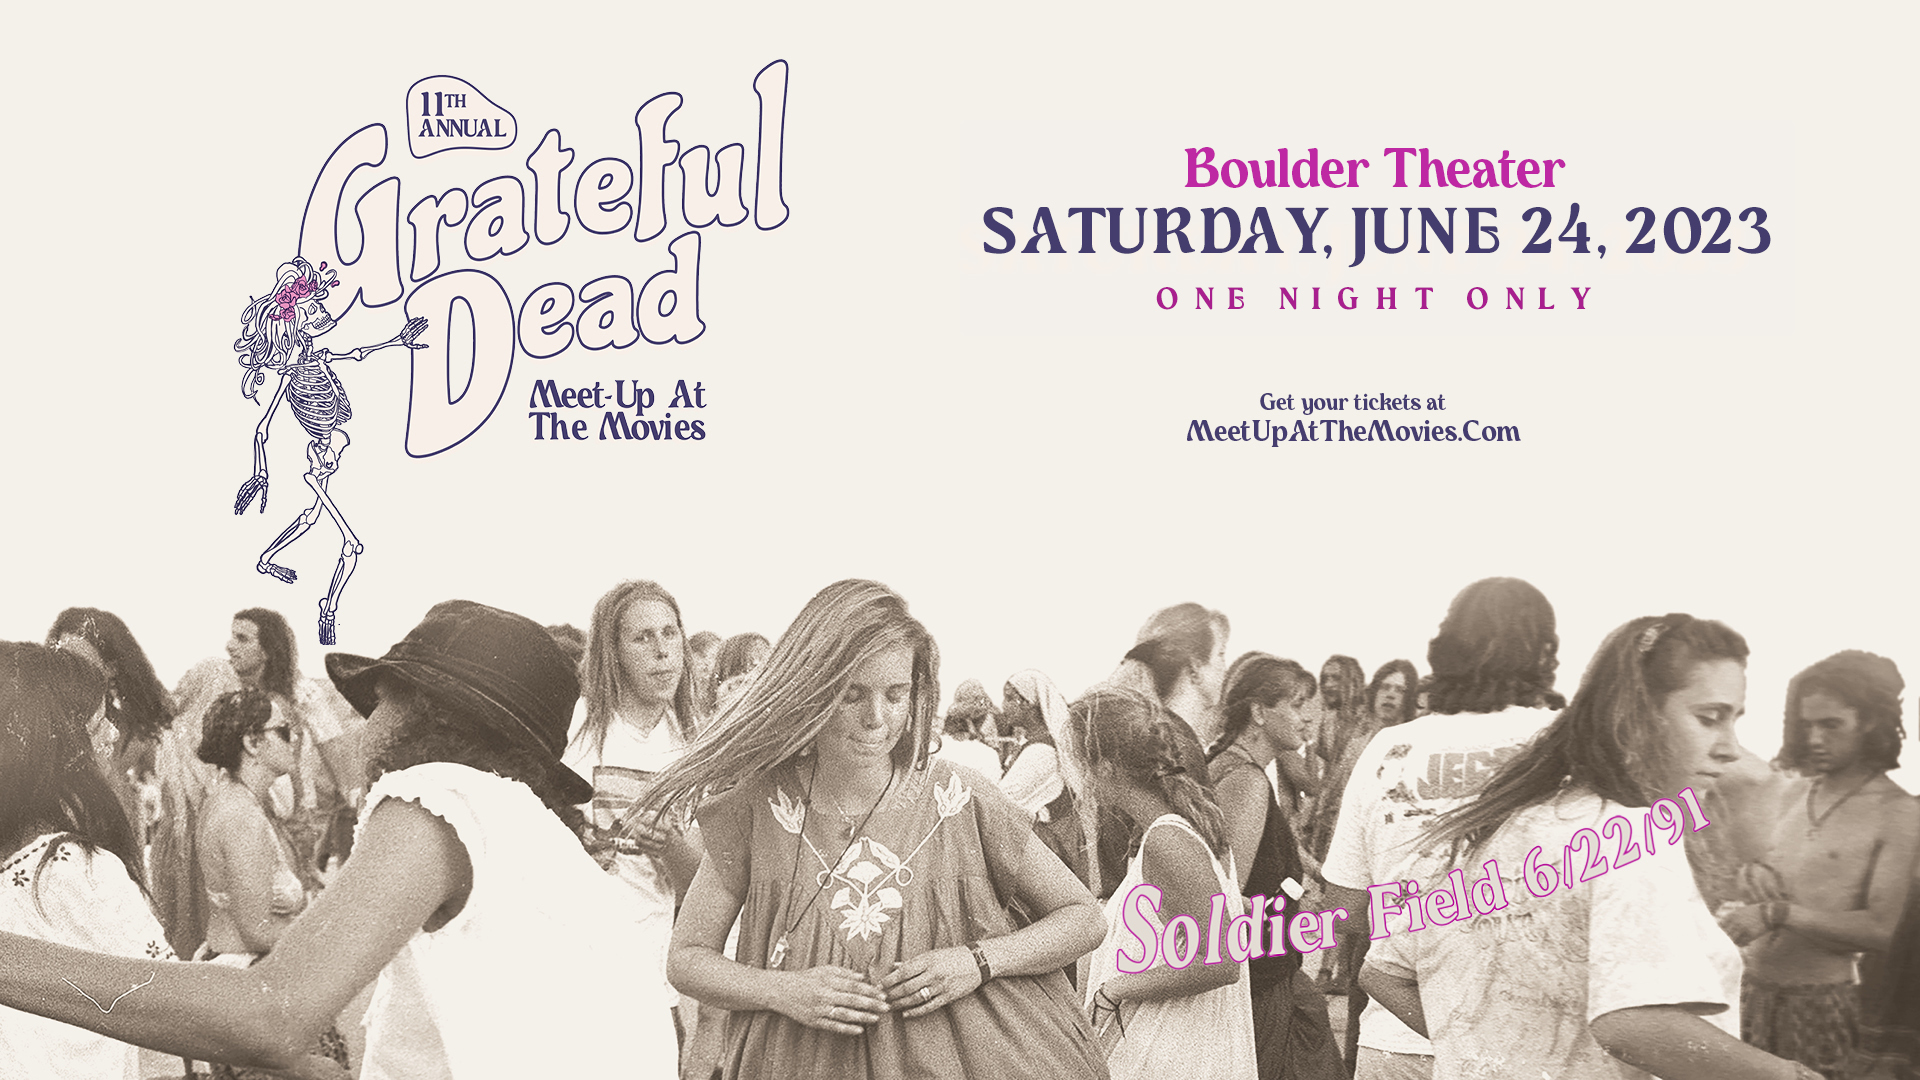 Grateful Dead "Meet-Up At The Movies” Next Saturday at Boulder Theater | 6/24/23